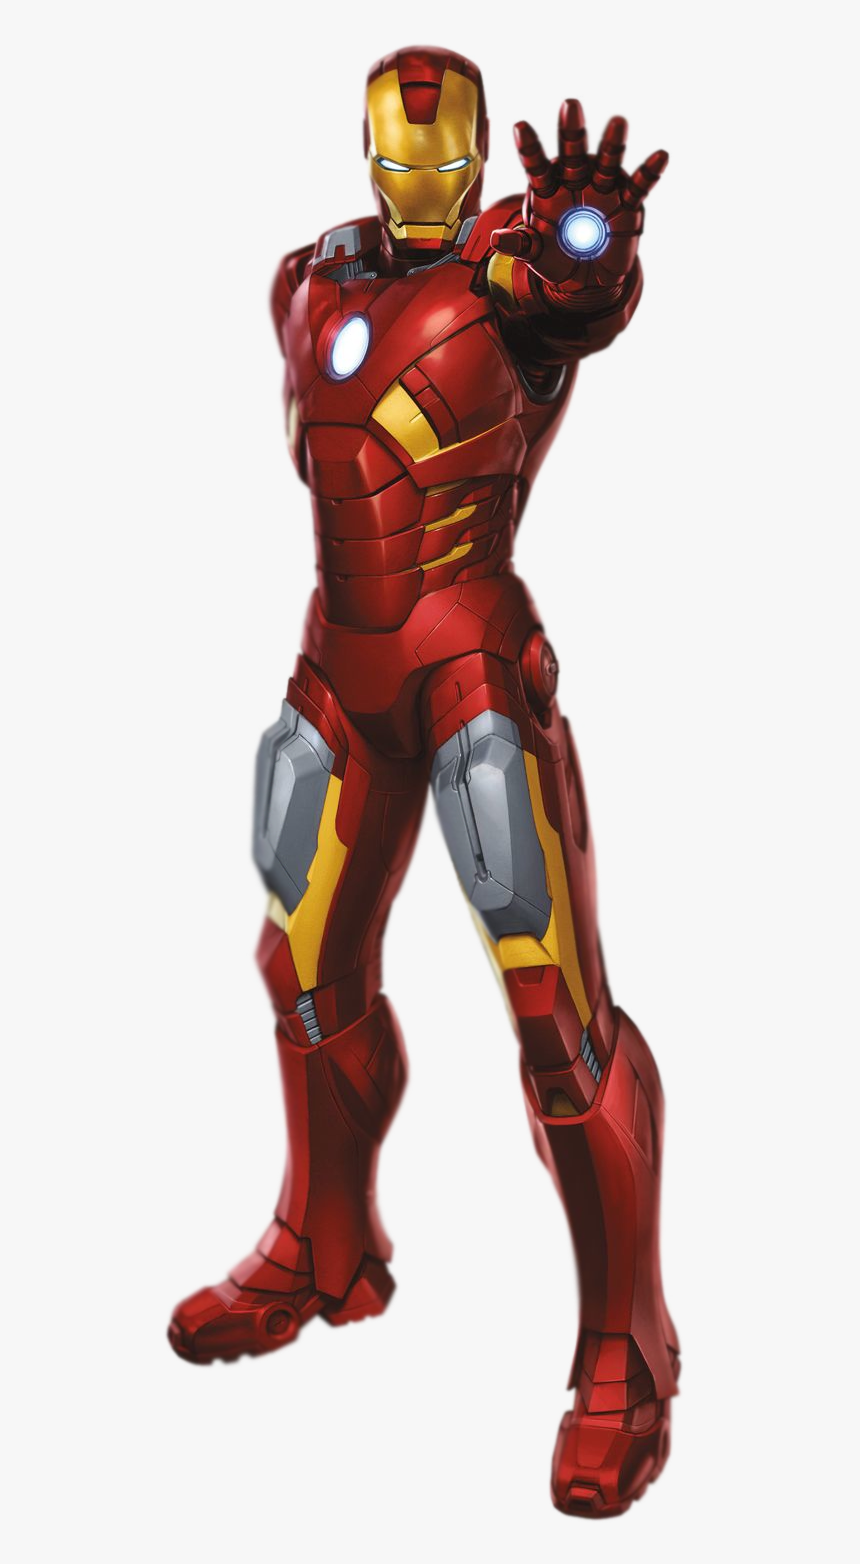 Ironman - Iron Man The Avengers 2012, HD Png Download, Free Download